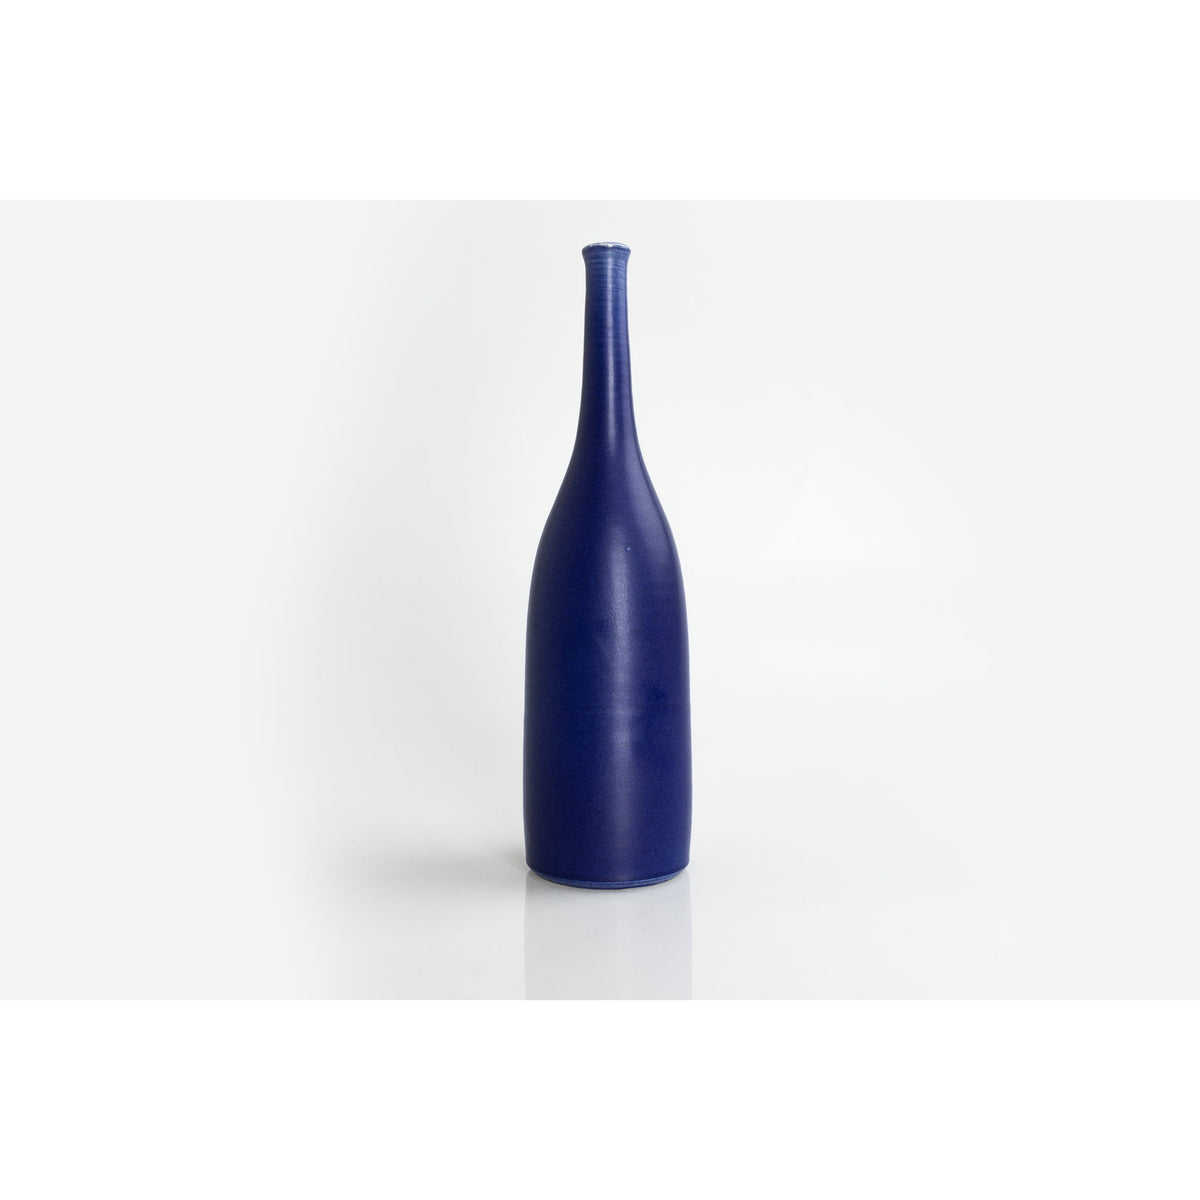 &#39;LB149 Ultramarine Bottle&#39; by Lucy Burley ceramics, available at Padstow Gallery, Cornwall